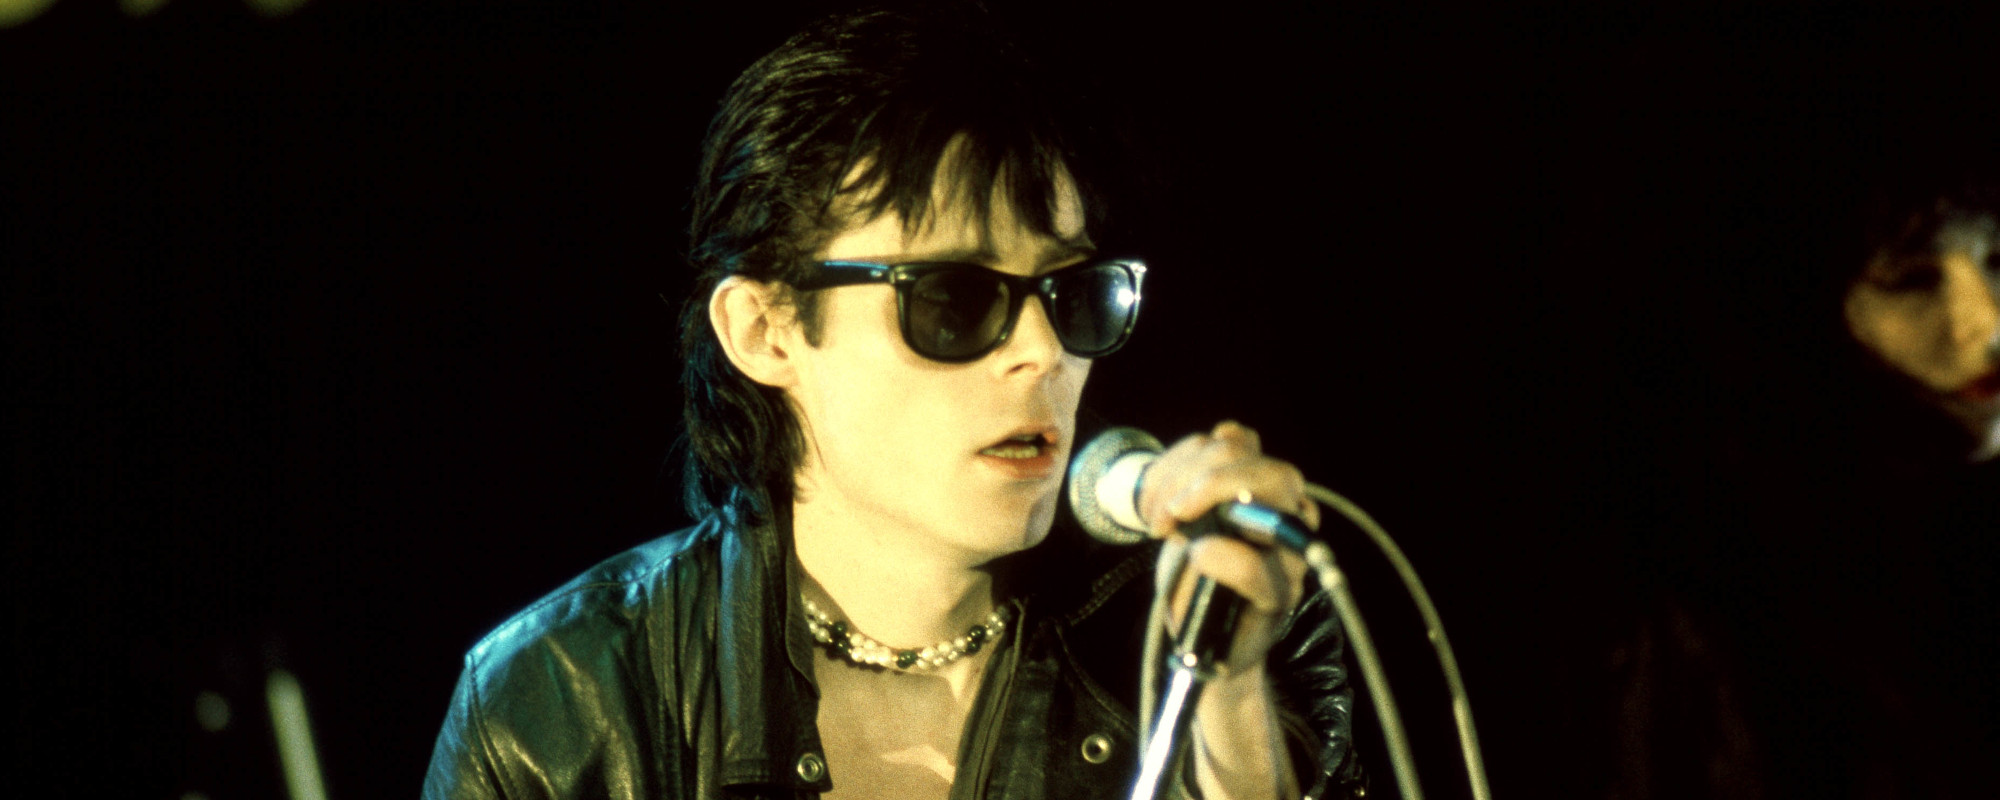 “Like a Disco Party Run by the Borgias”: The “Ridiculousness” that Inspired “This Corrosion” by The Sisters Of Mercy